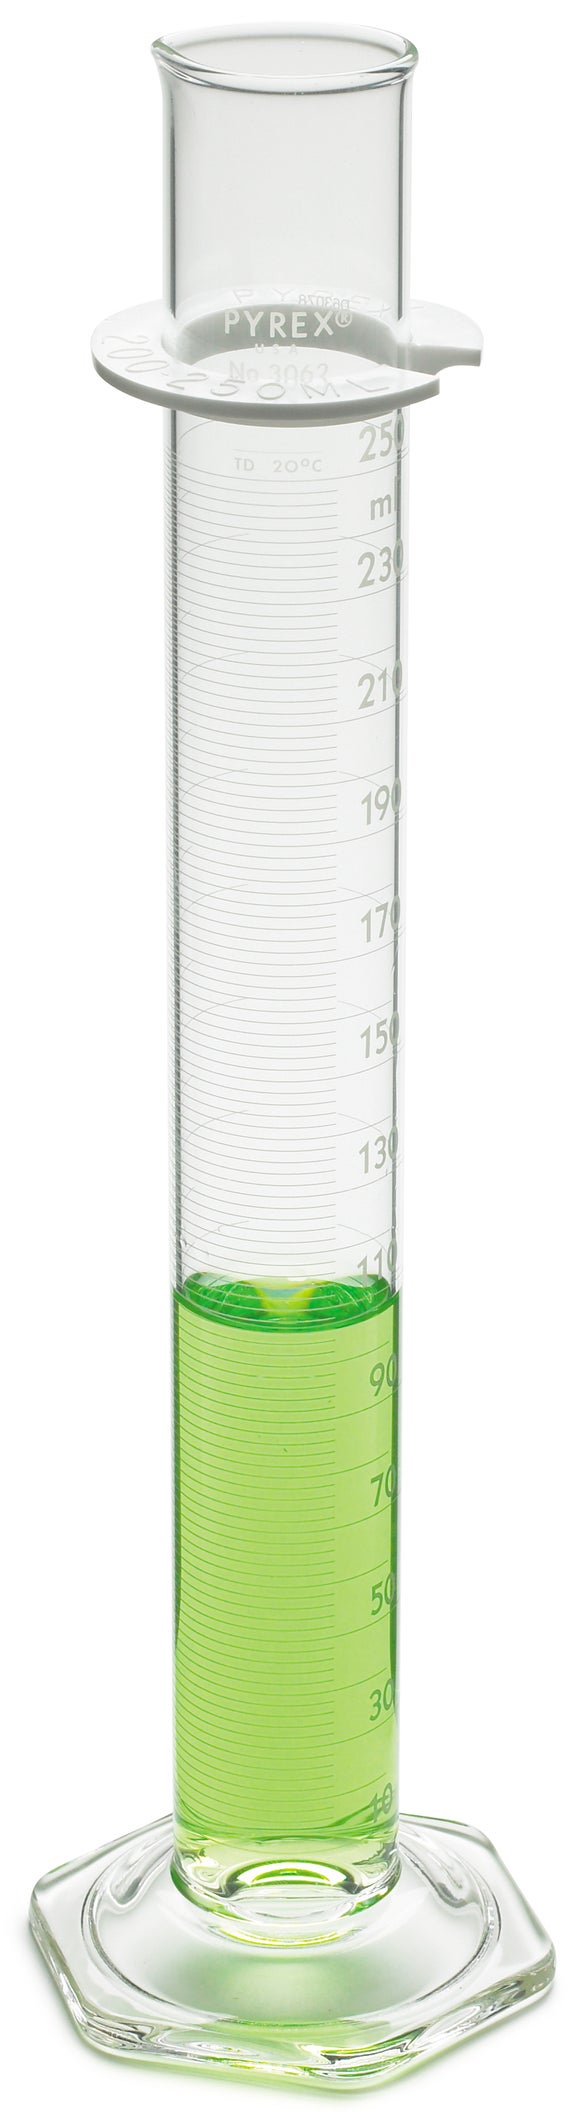 Cylinder, Graduated, 100 mL, Certified